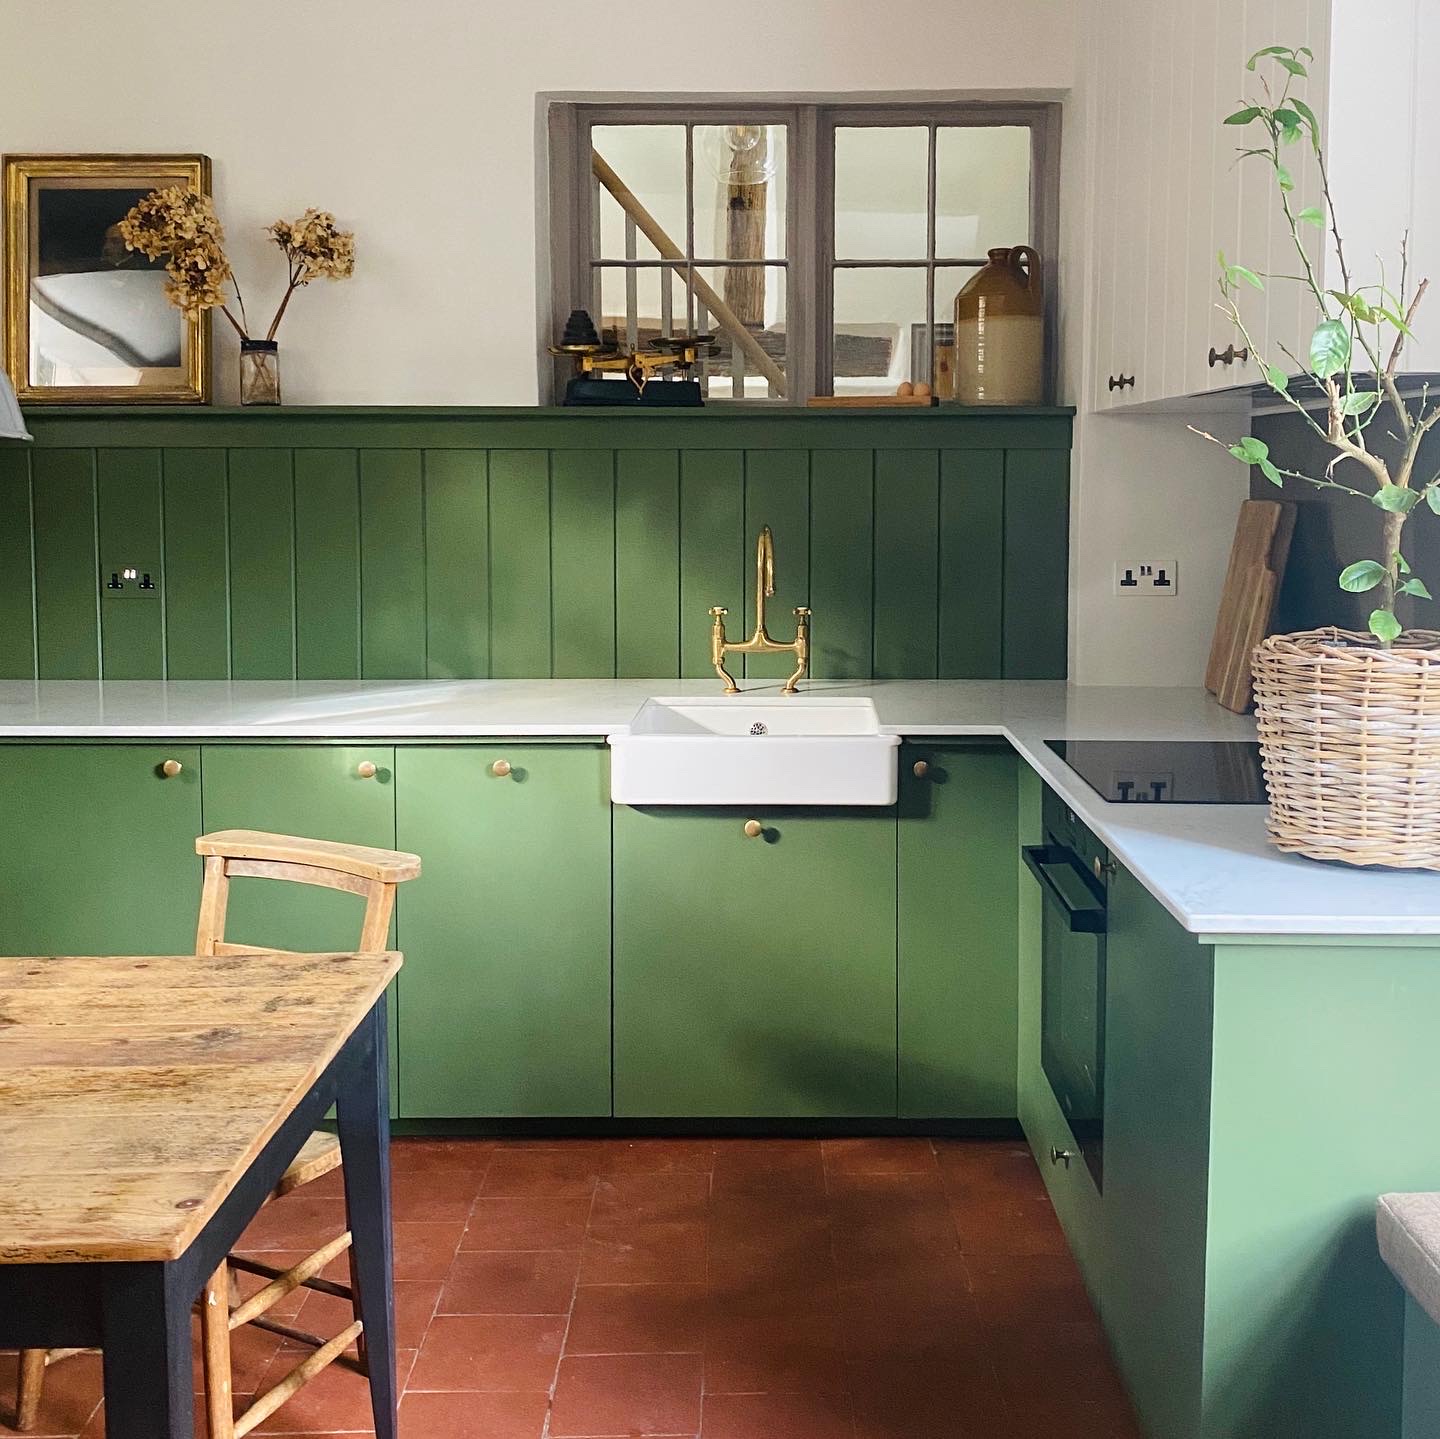 The 10 Best Ikea Kitchen S For A, Does Ikea Do Custom Countertops